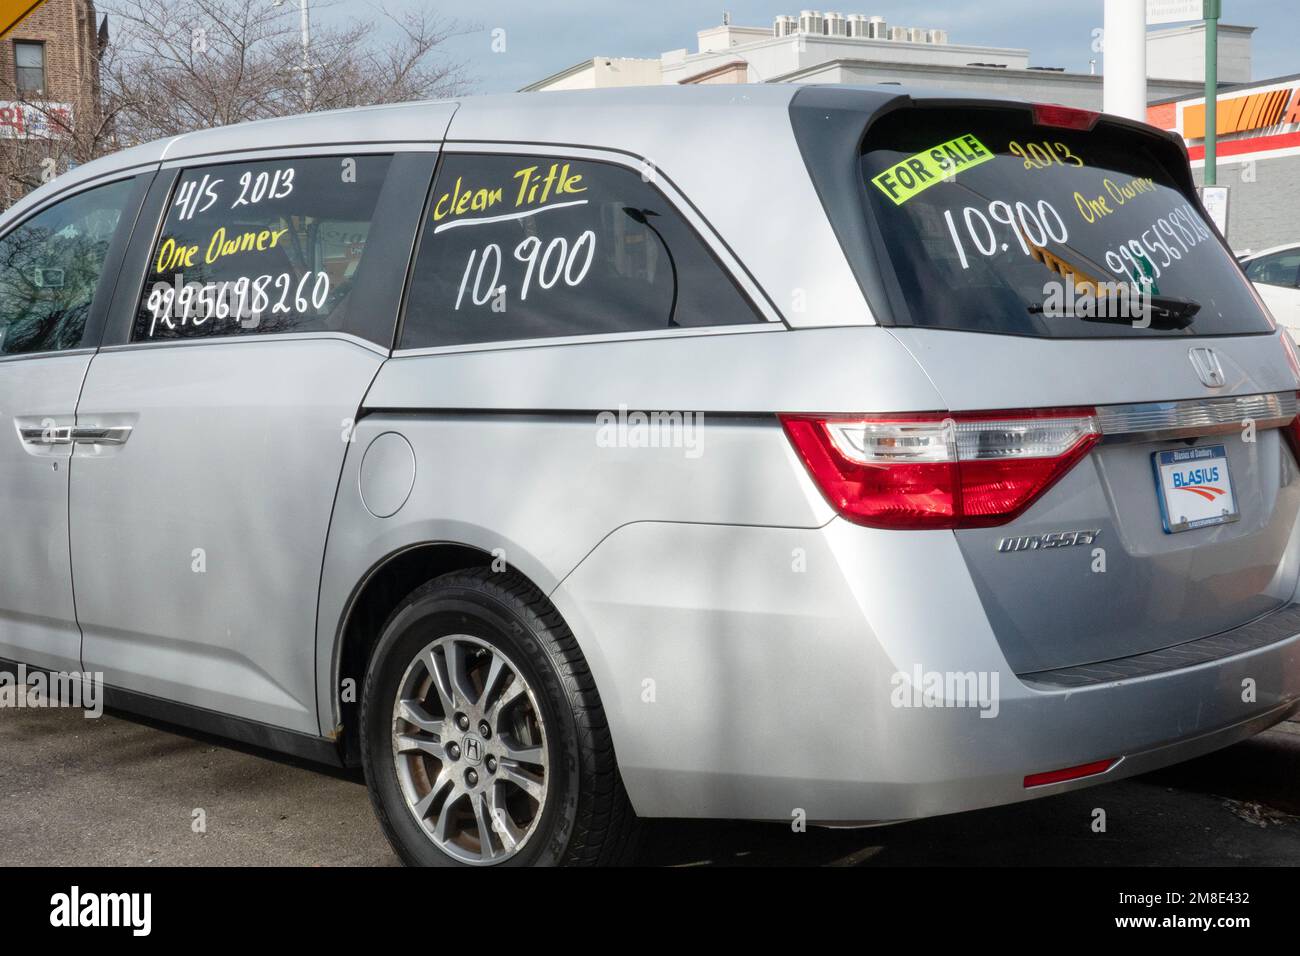 .A Honda 2013 SUV parked on the street in Flushing NYC with for sale info written on the windows. Stock Photo